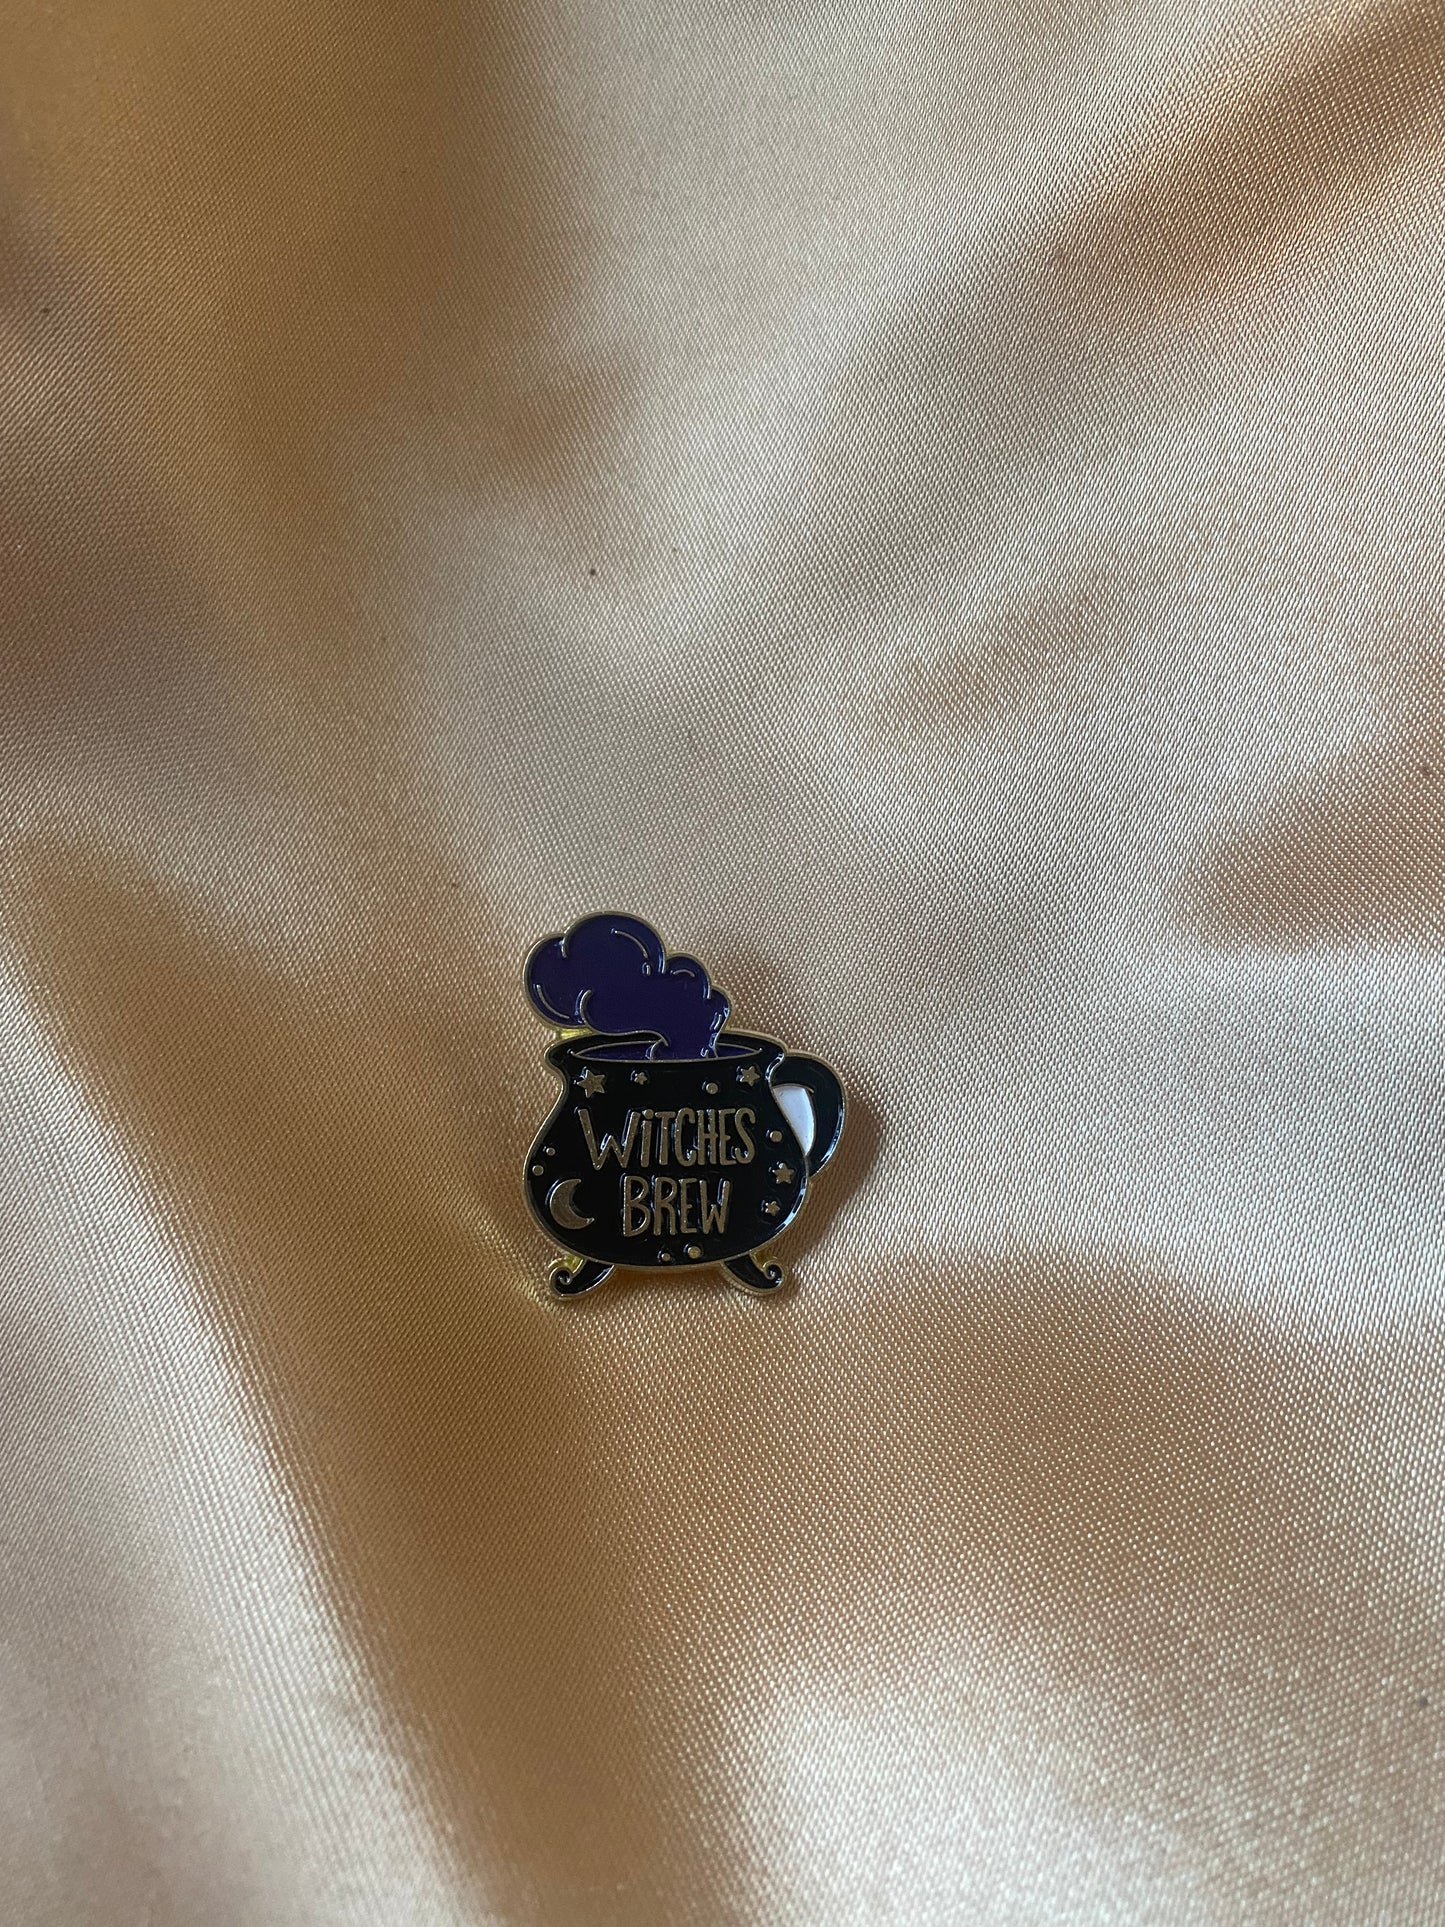 Witches Brew Pin Badge